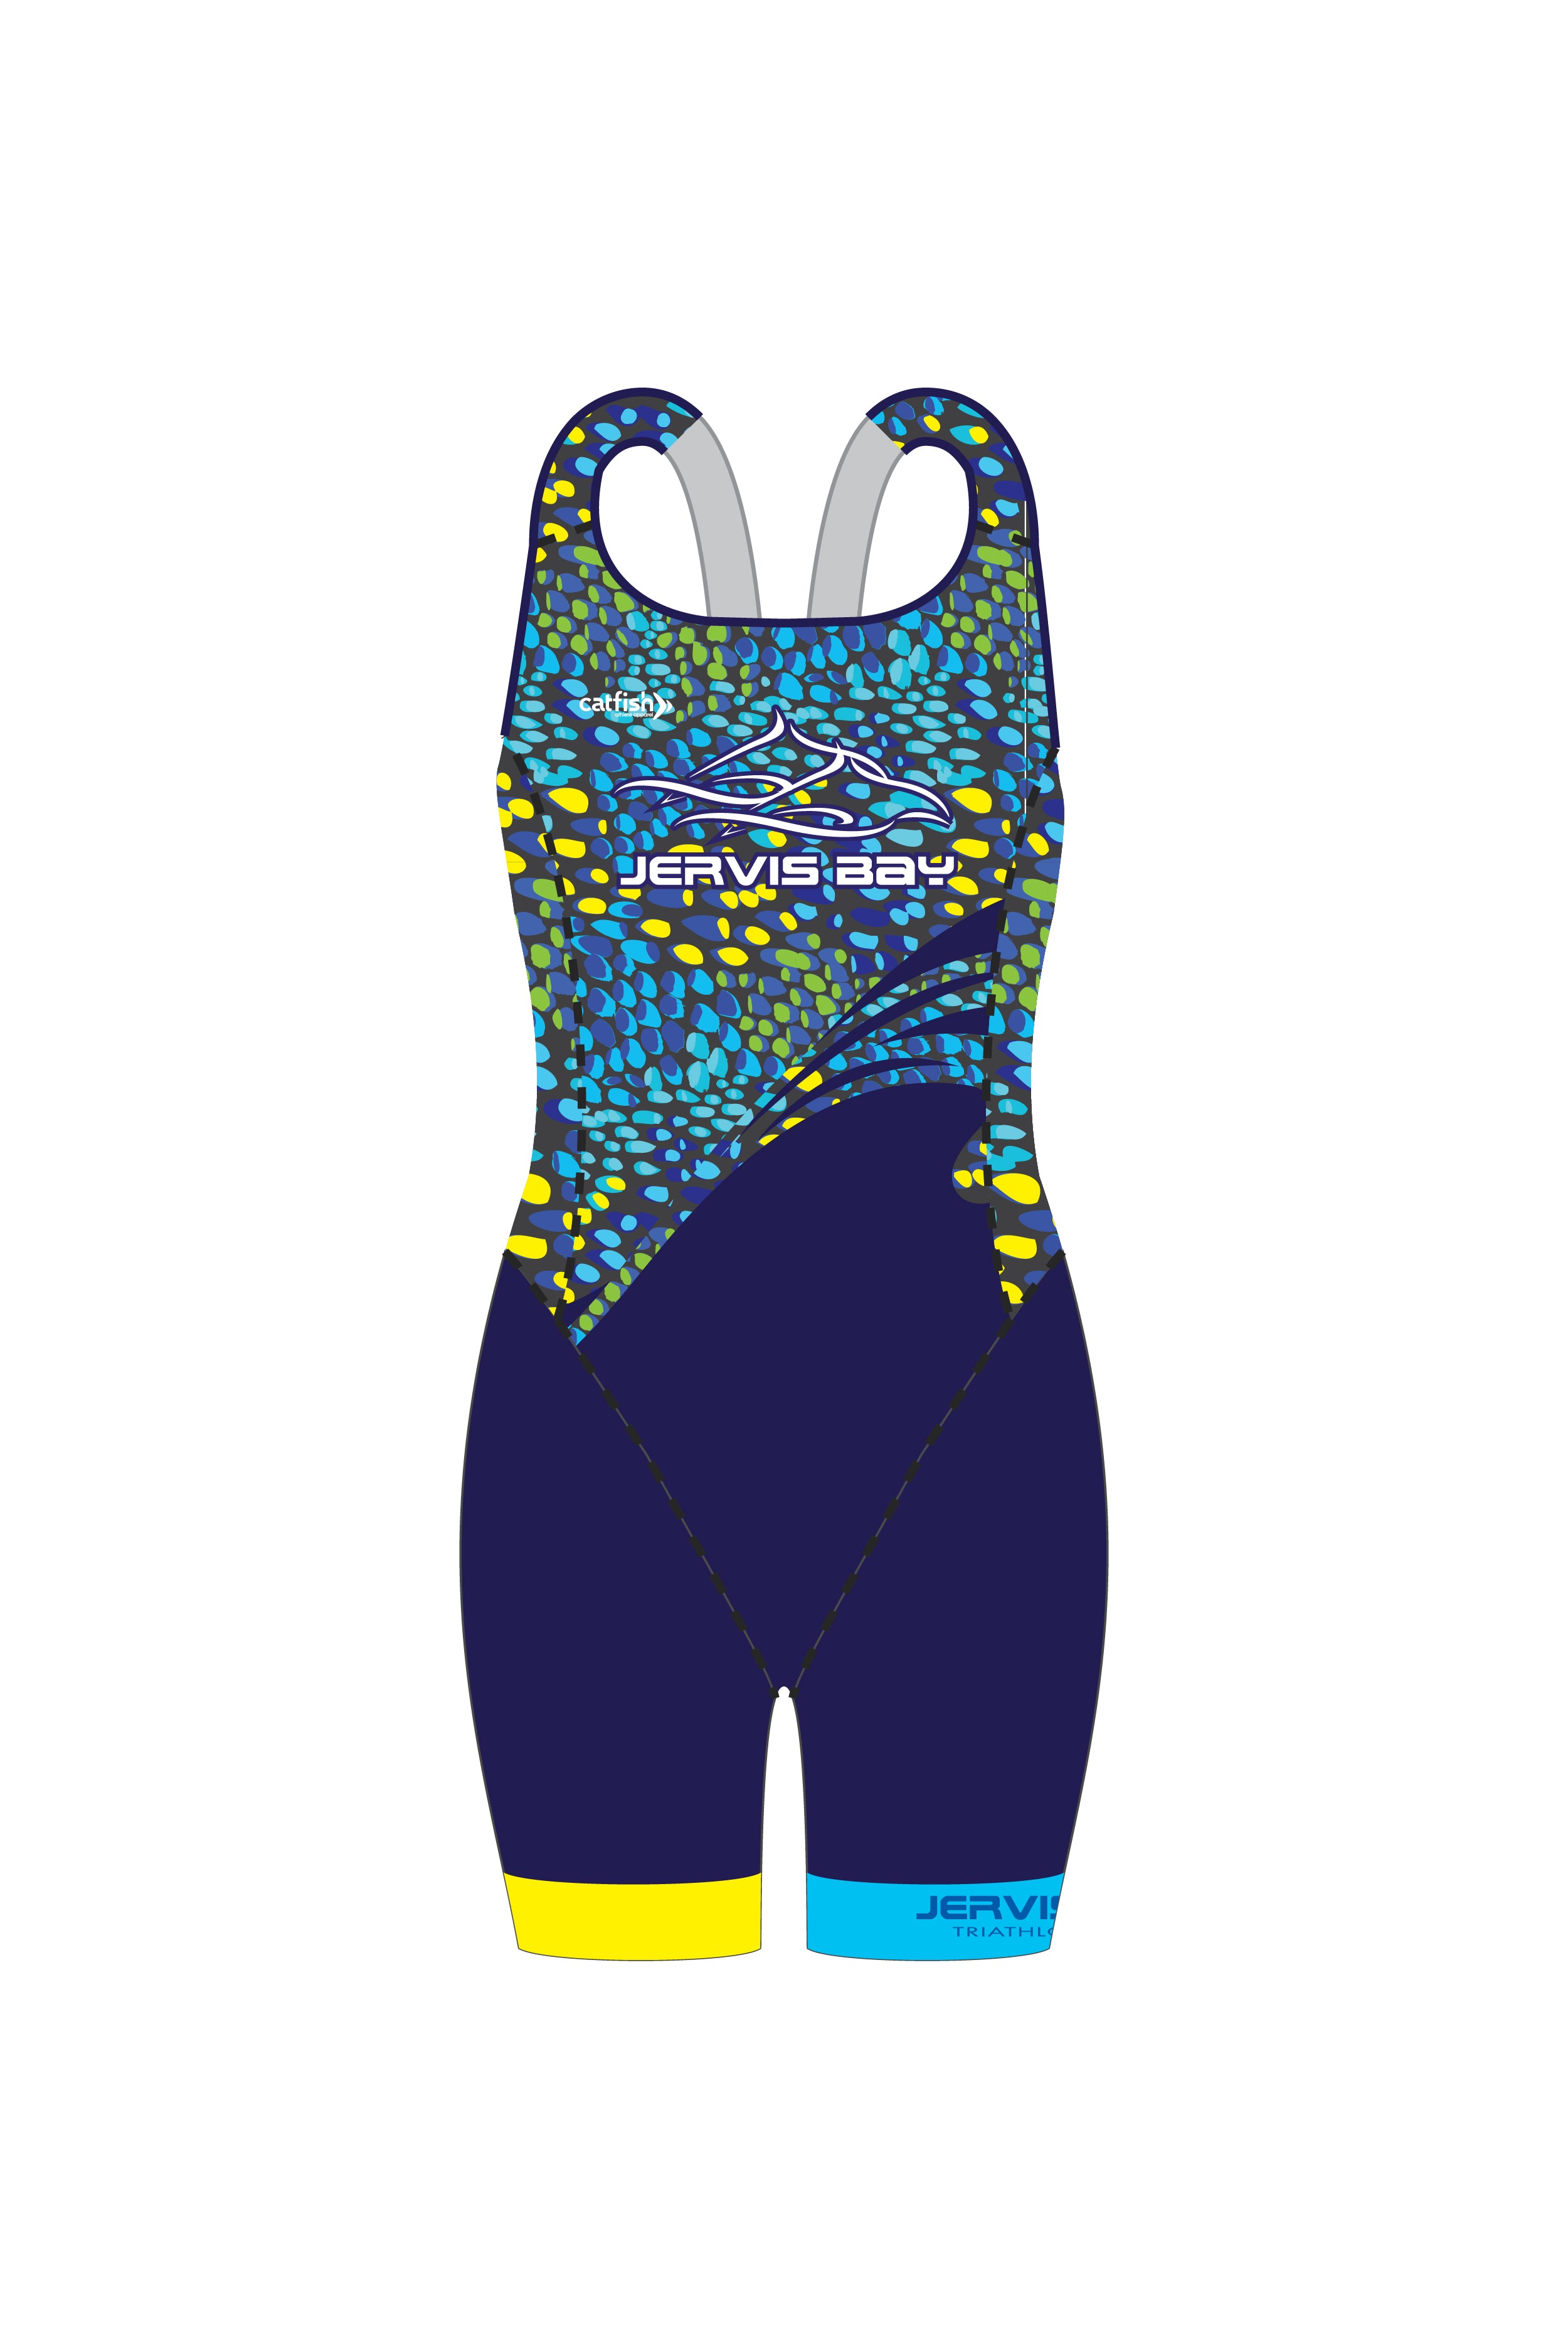 Jervis Bay Tri Club Girl's Open Back Tri Suit